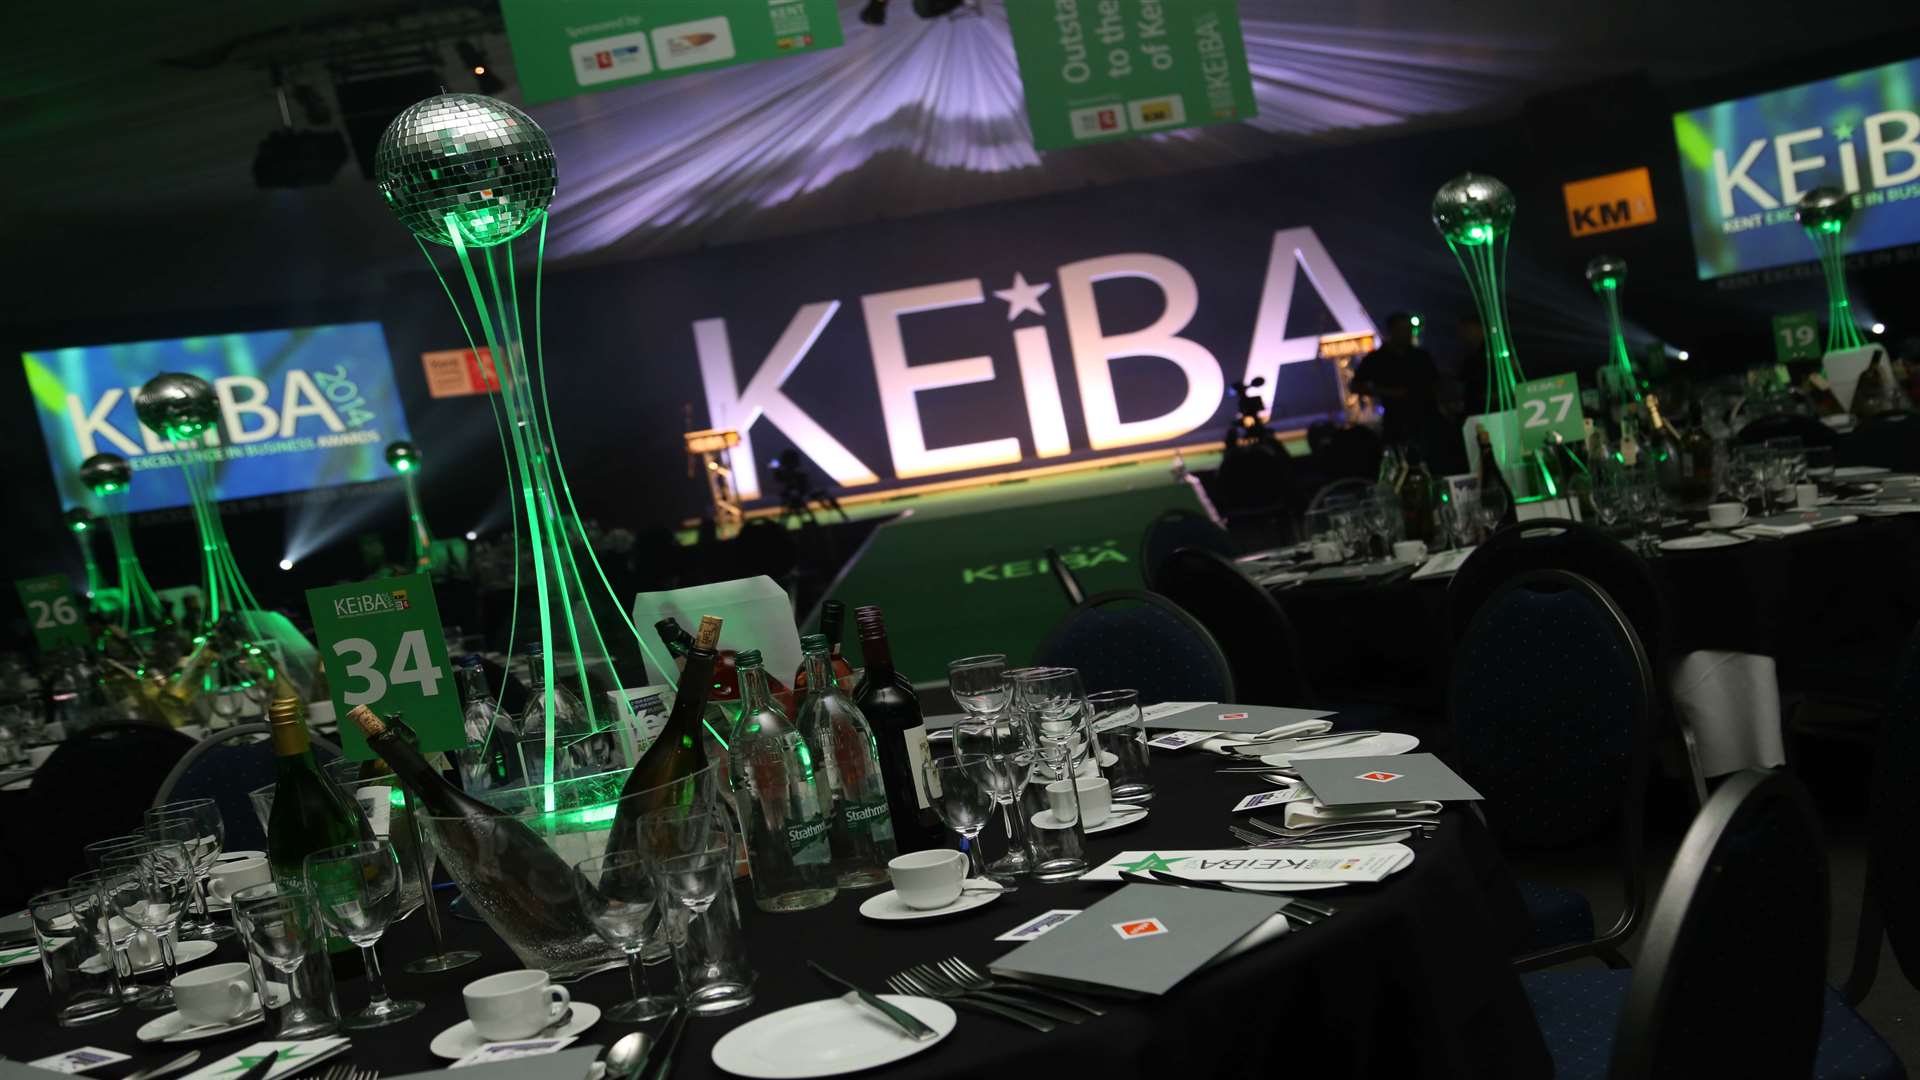 The winners will be announced at the KEiBA gala dinner at Kent Event Centre